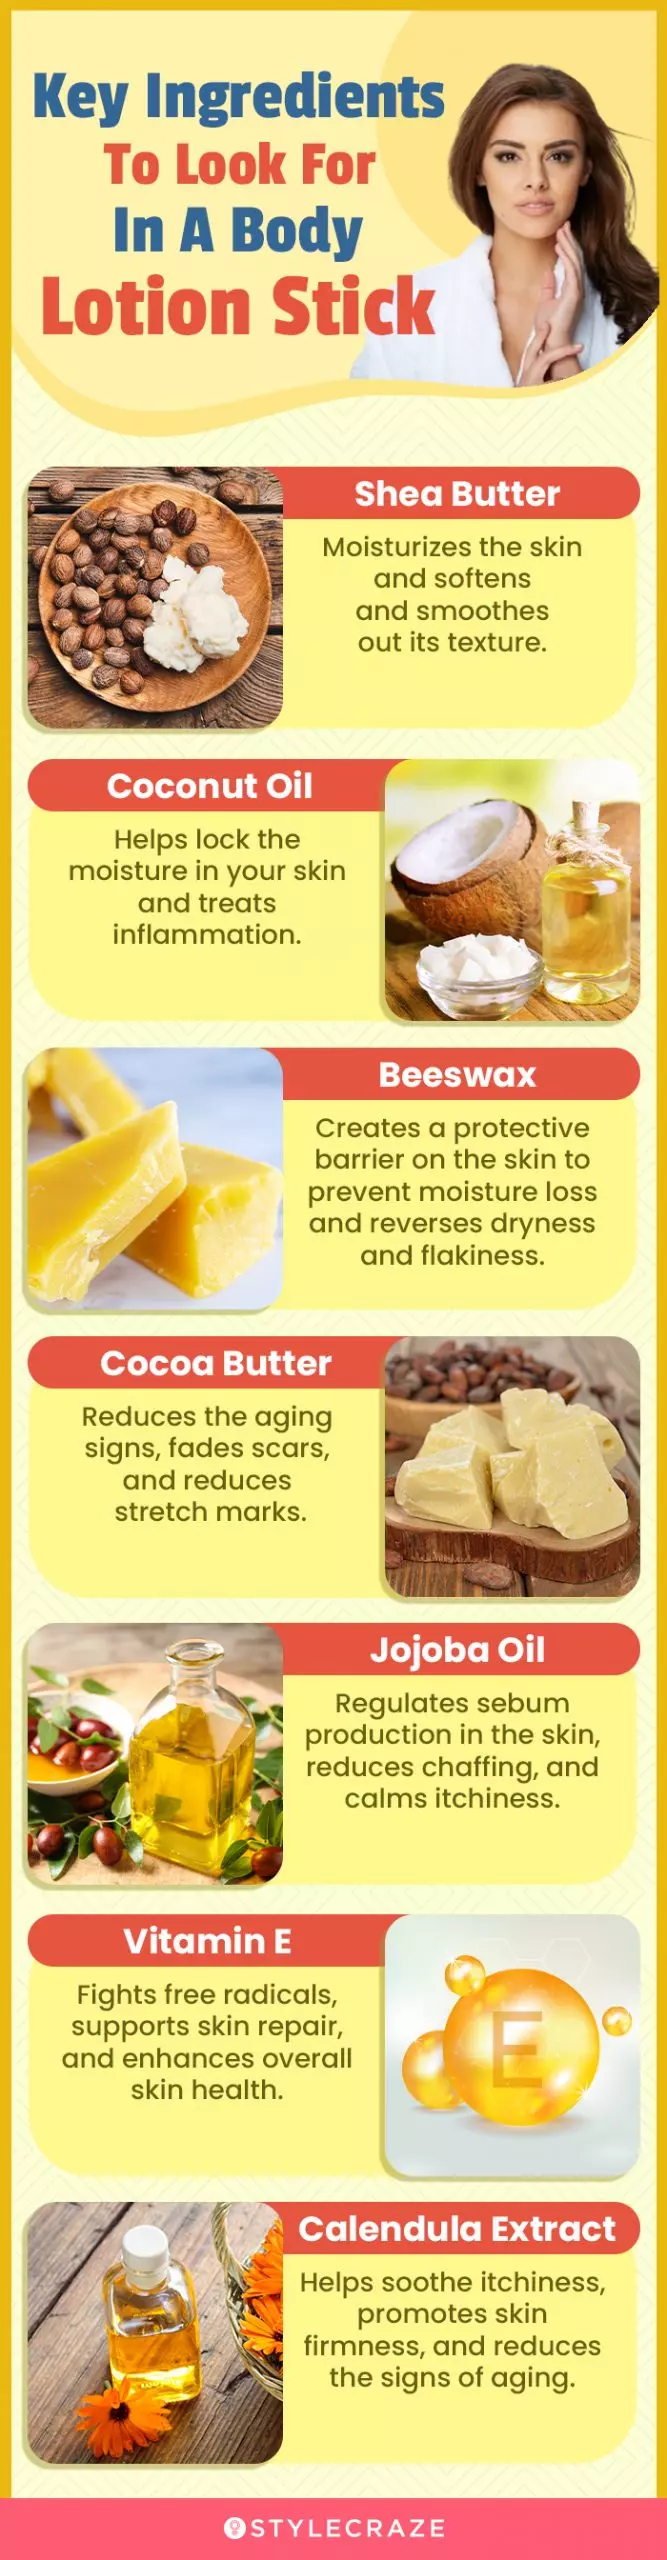 Key Ingredients To Look For In A Body Lotion Stick(infographic)